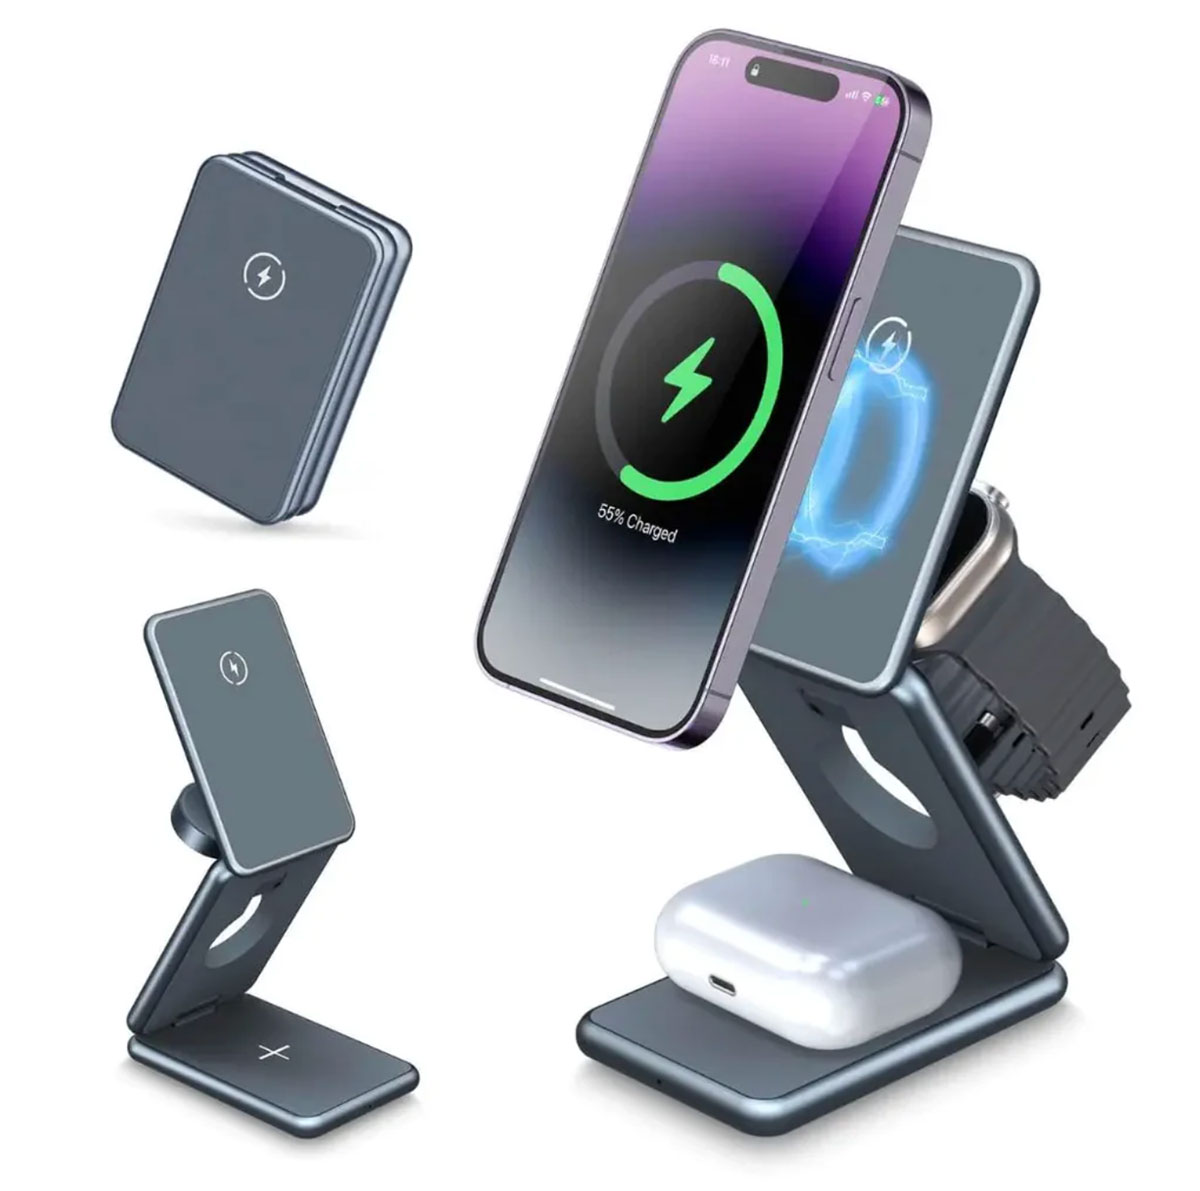 Evolved 3-in-1 Foldable Charger – Smallest 3-in-1 Apple Watch travel charger